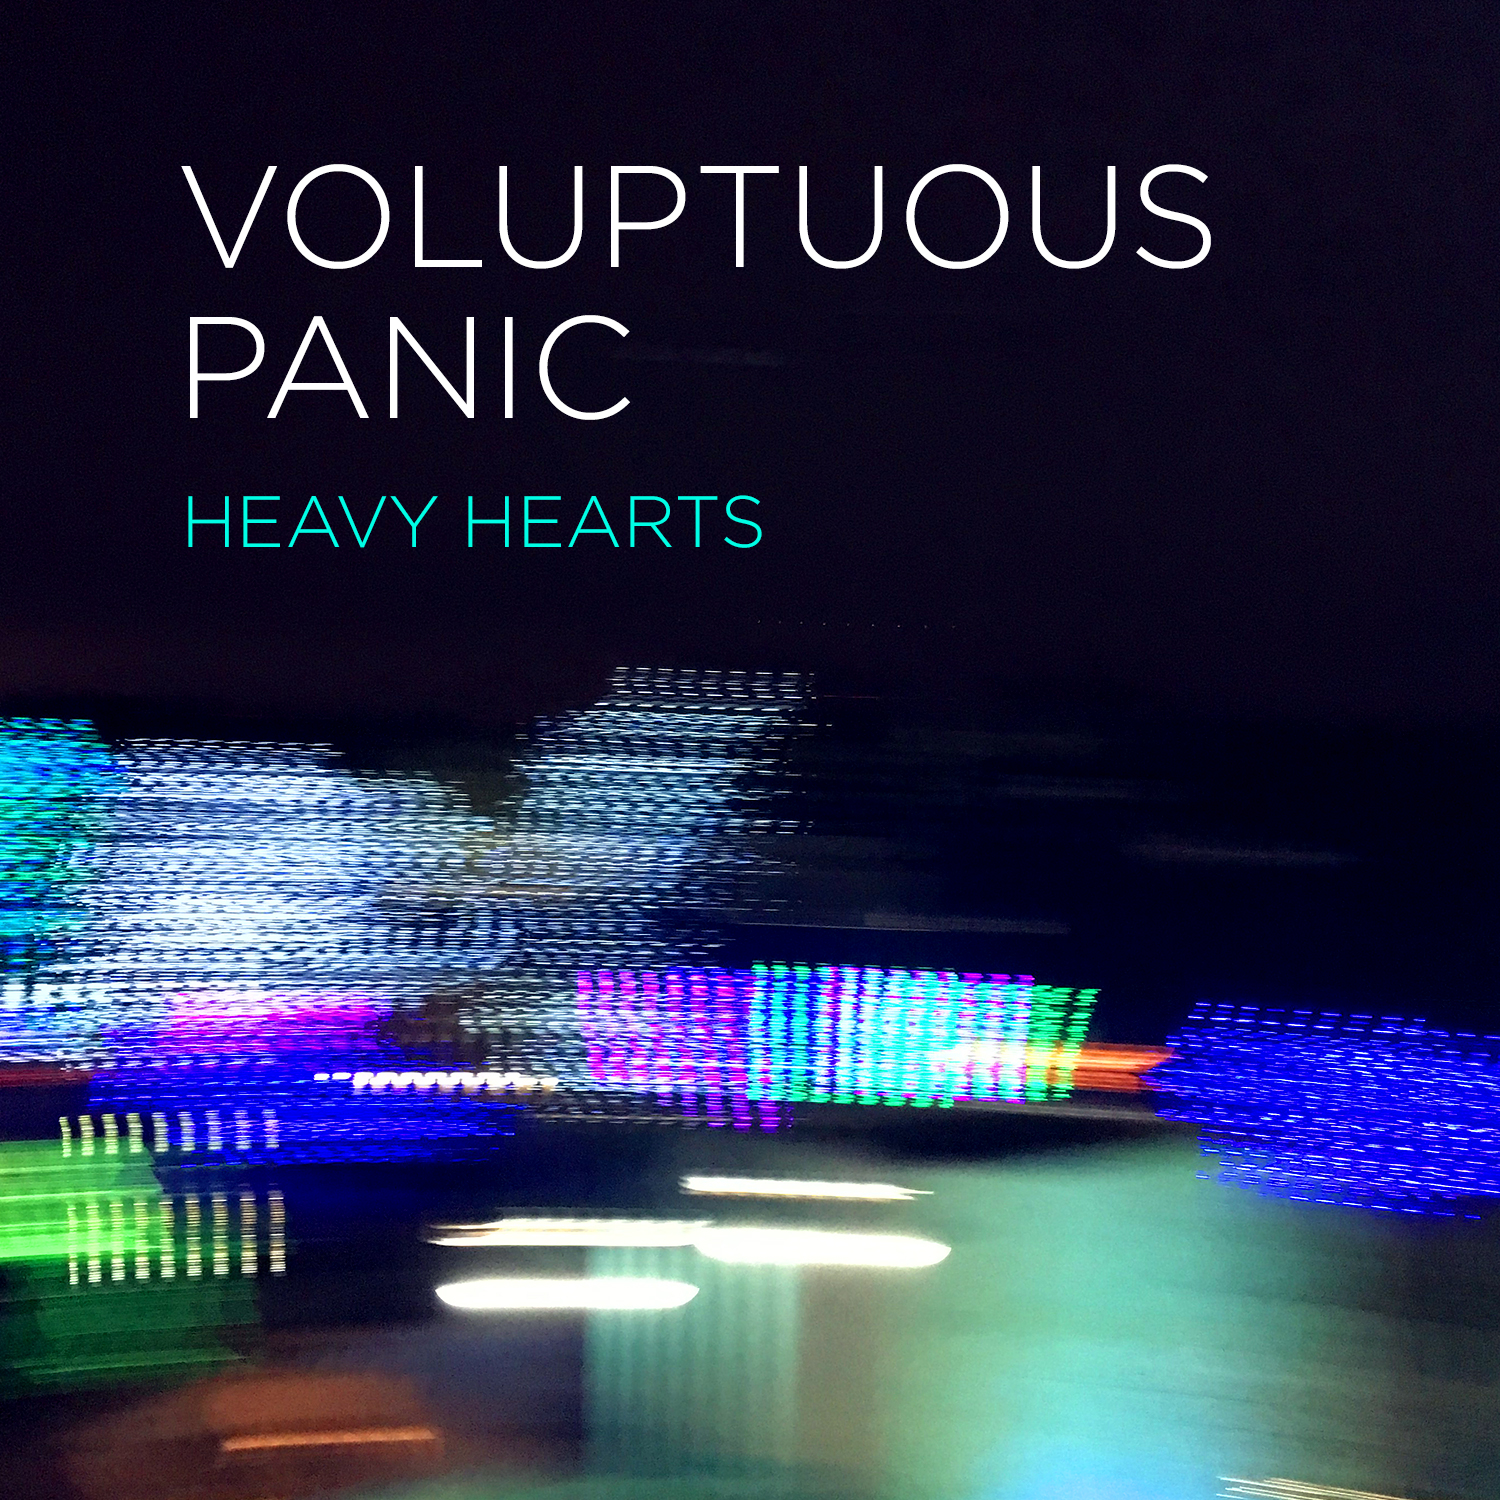 Heavy Hearts by Voluptuous Panic